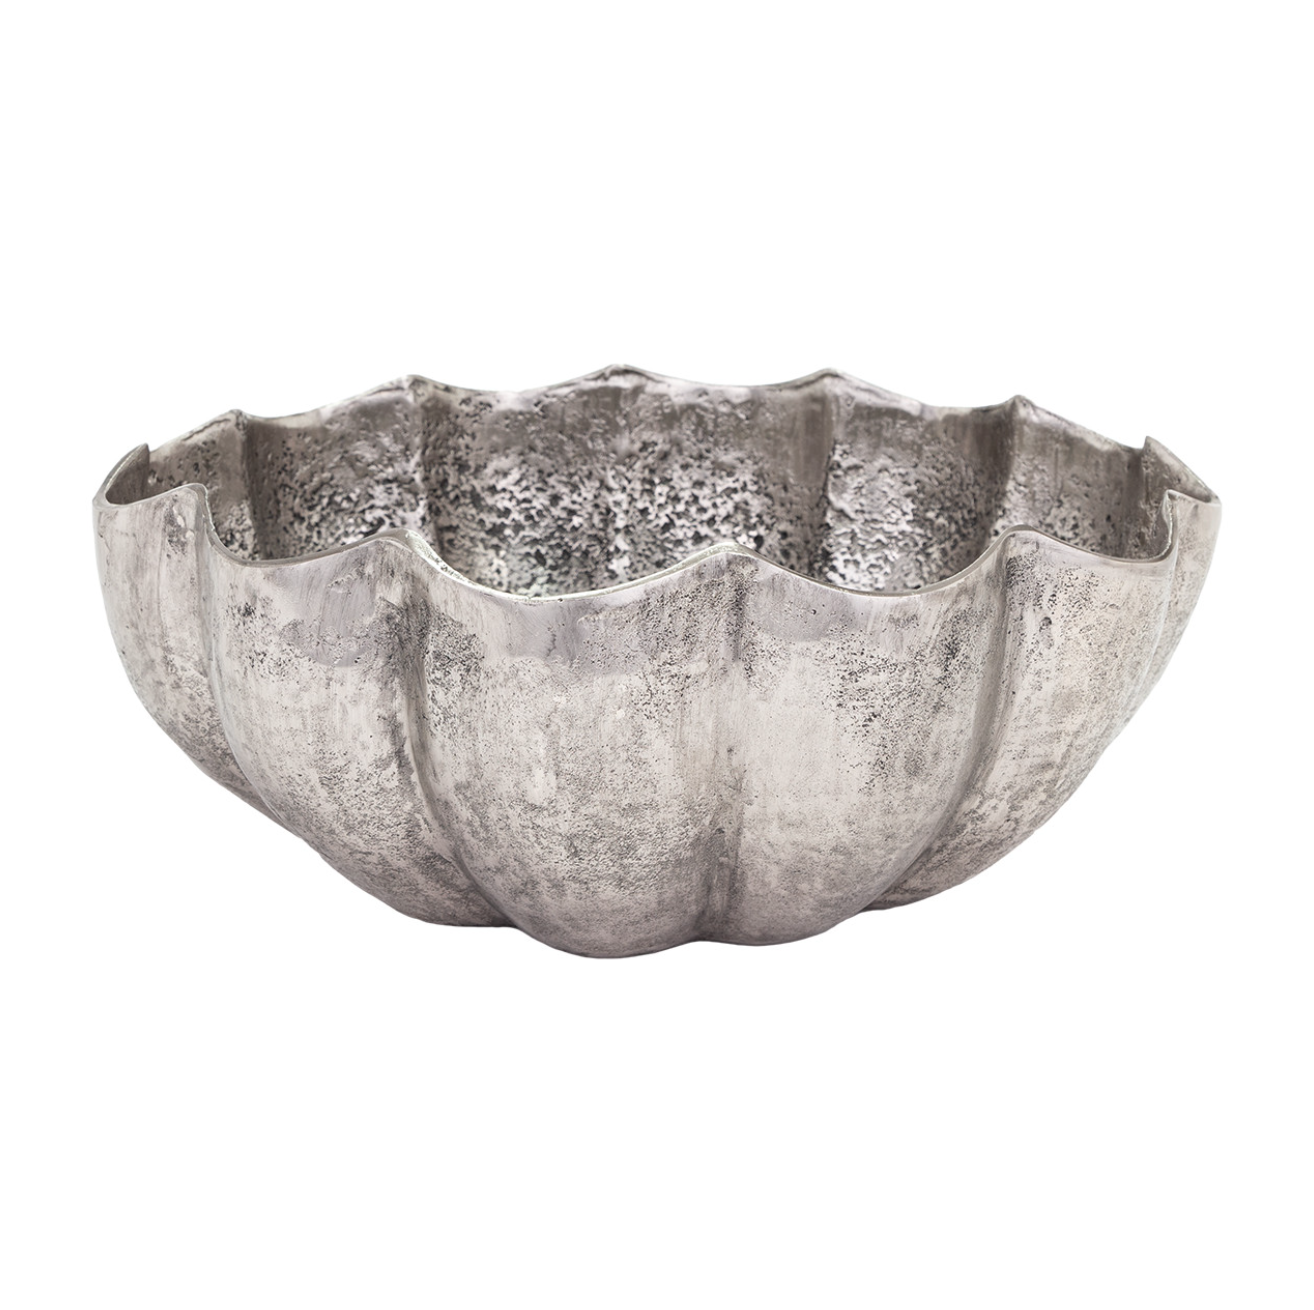 A textured, silver metallic Catriona Bowl with a wavy, irregular rim, showcasing a hammered interior finish, isolated on a white background in Scottsdale Arizona by The Import Collection.